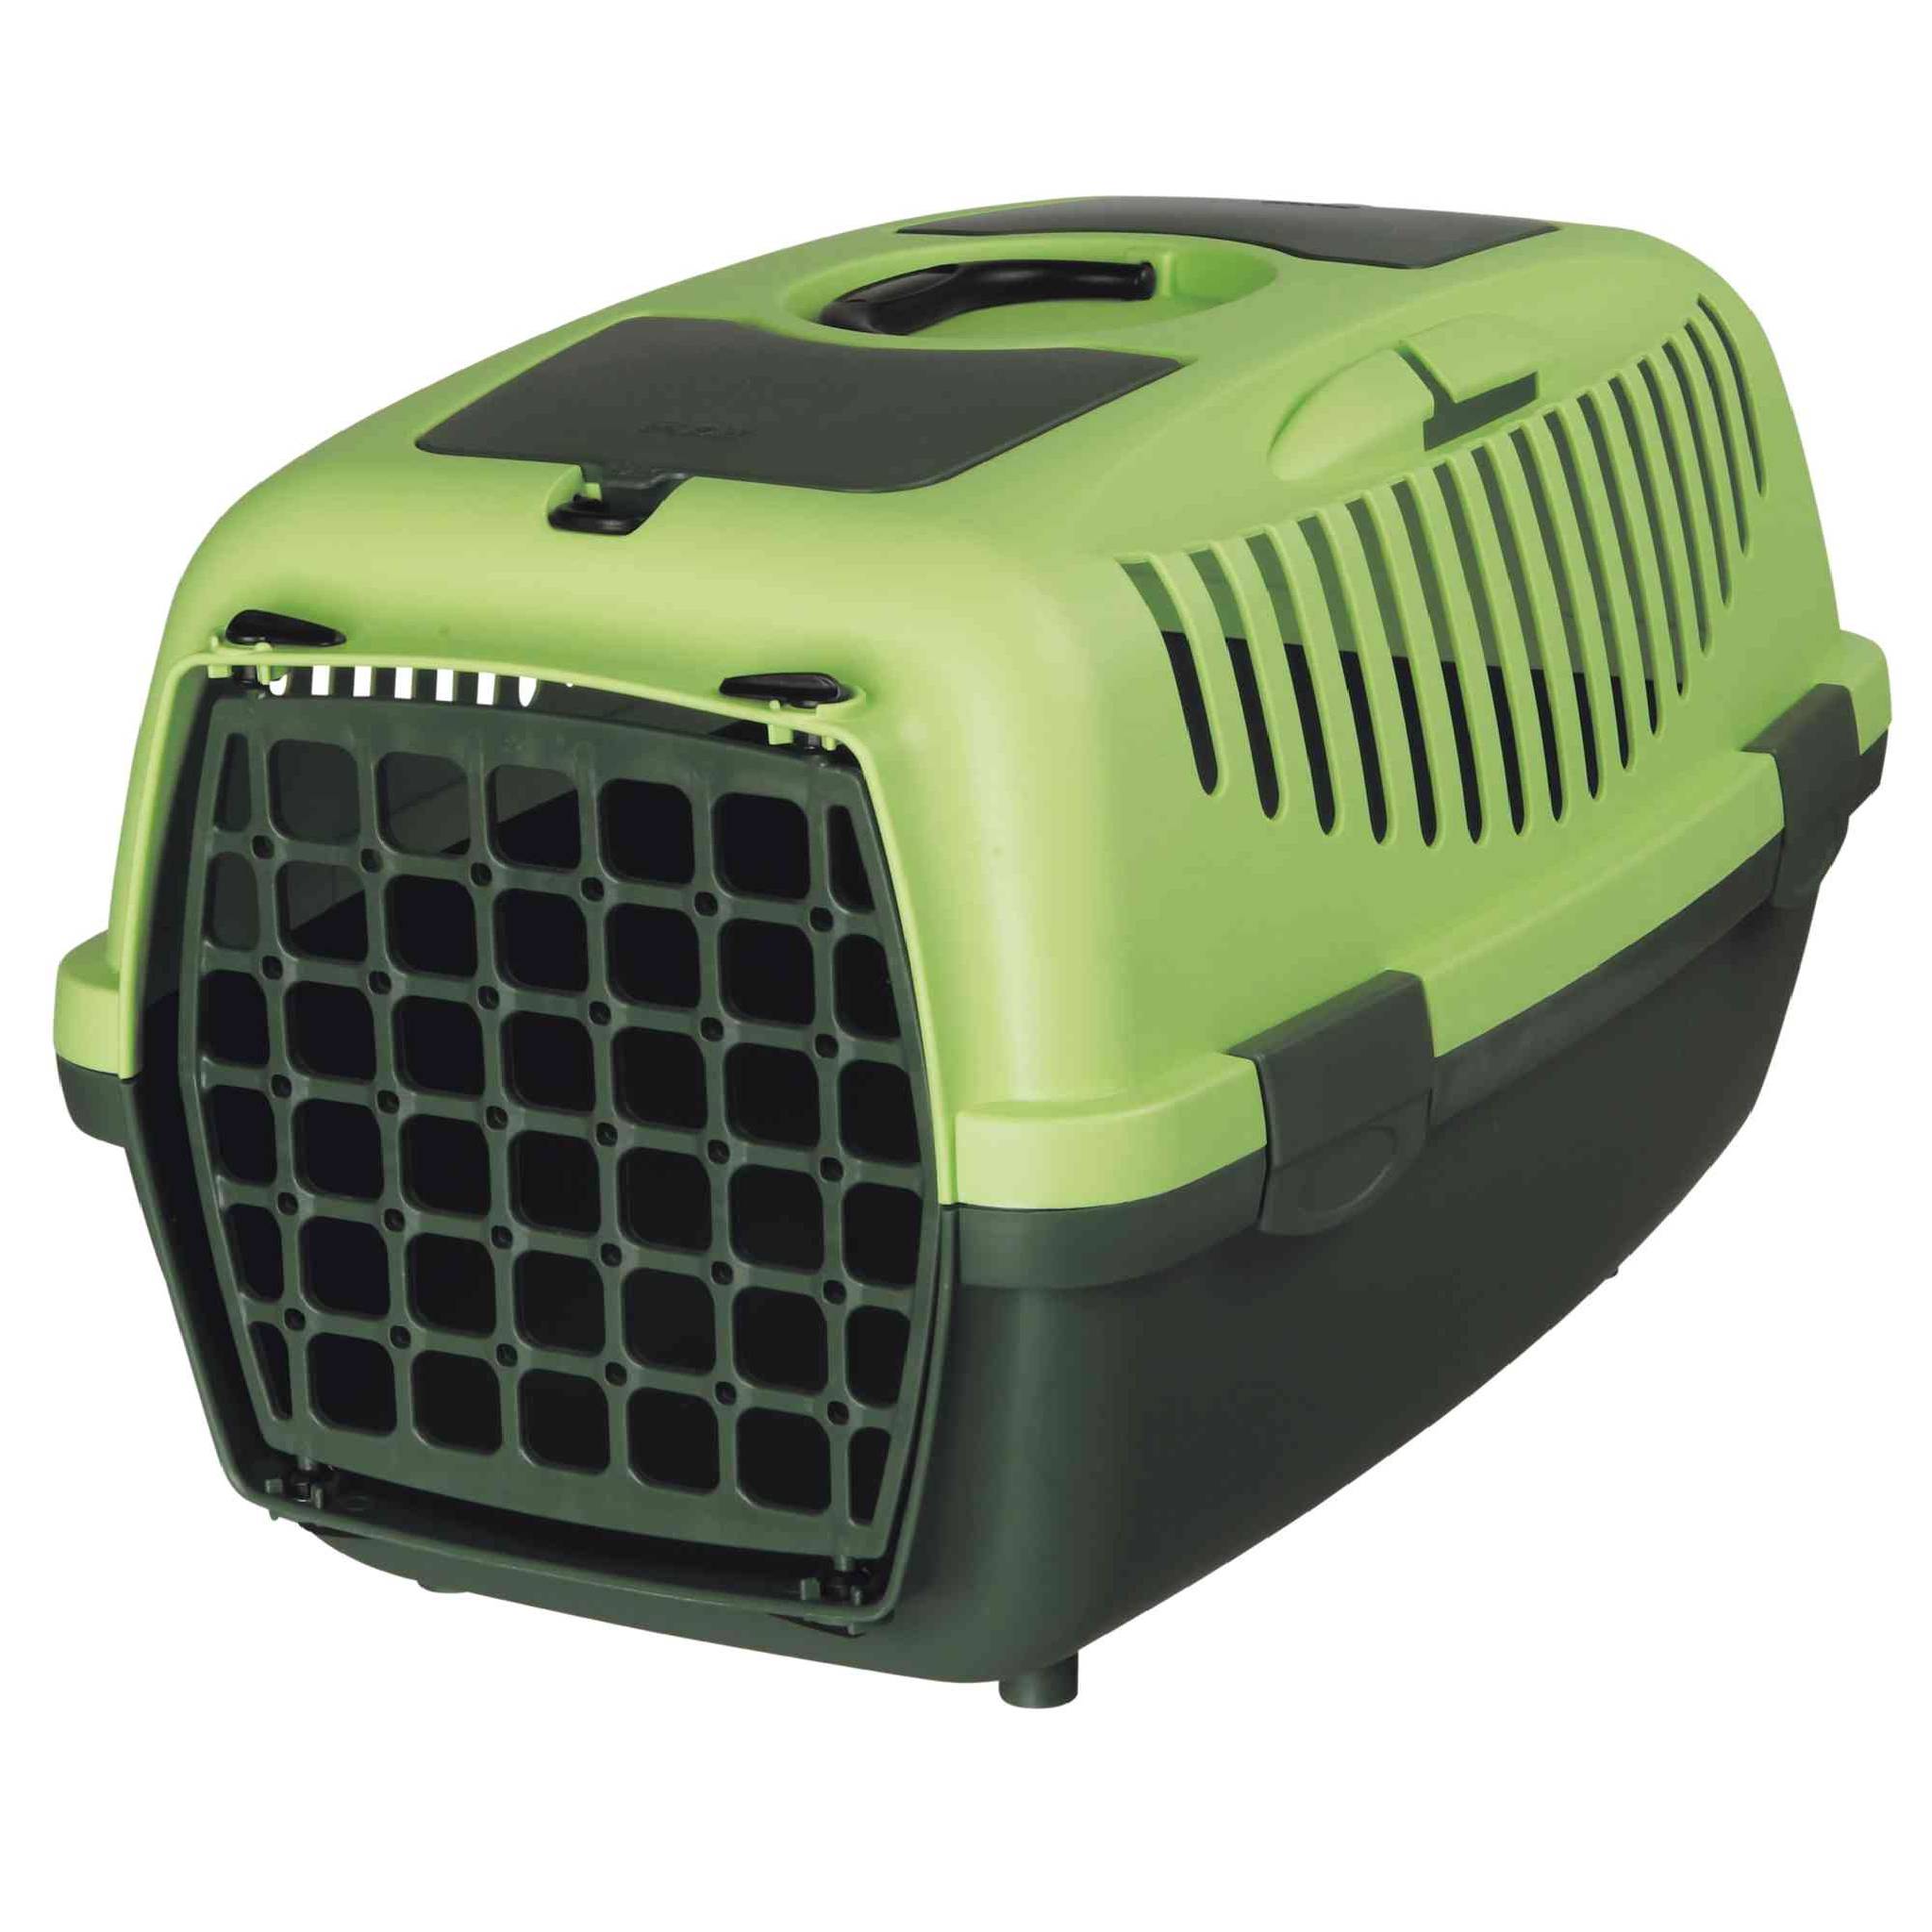 Trixie Pet Transport Box with stroking flap